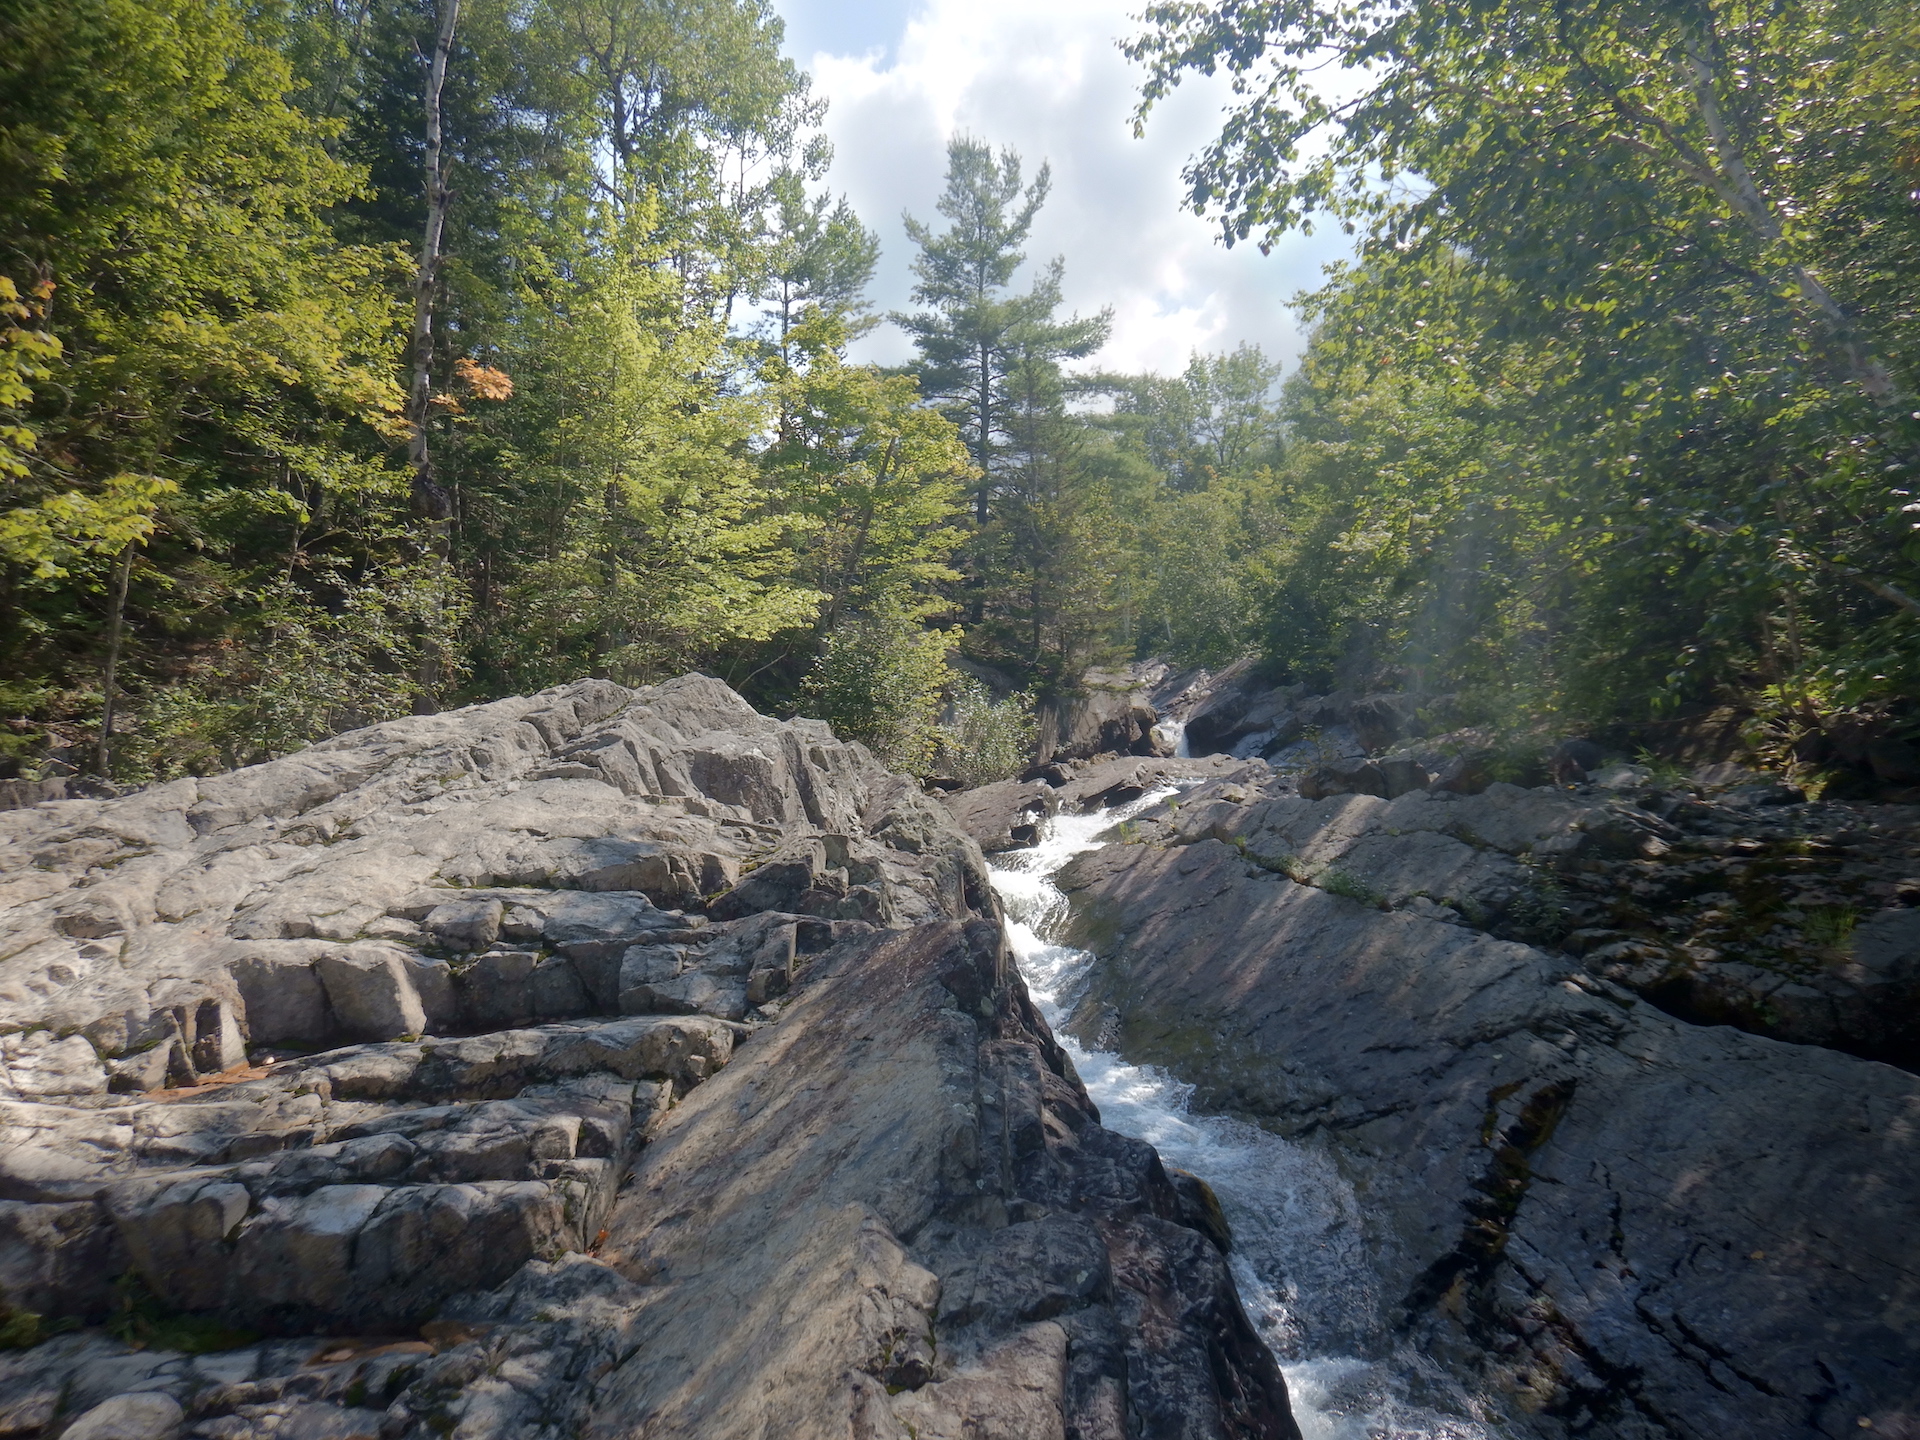 A stream flows through a narrow chute carved into bedrock. The stream flows from center to bottom right. Deciduous trees and some white pines overtop the stream and trees.